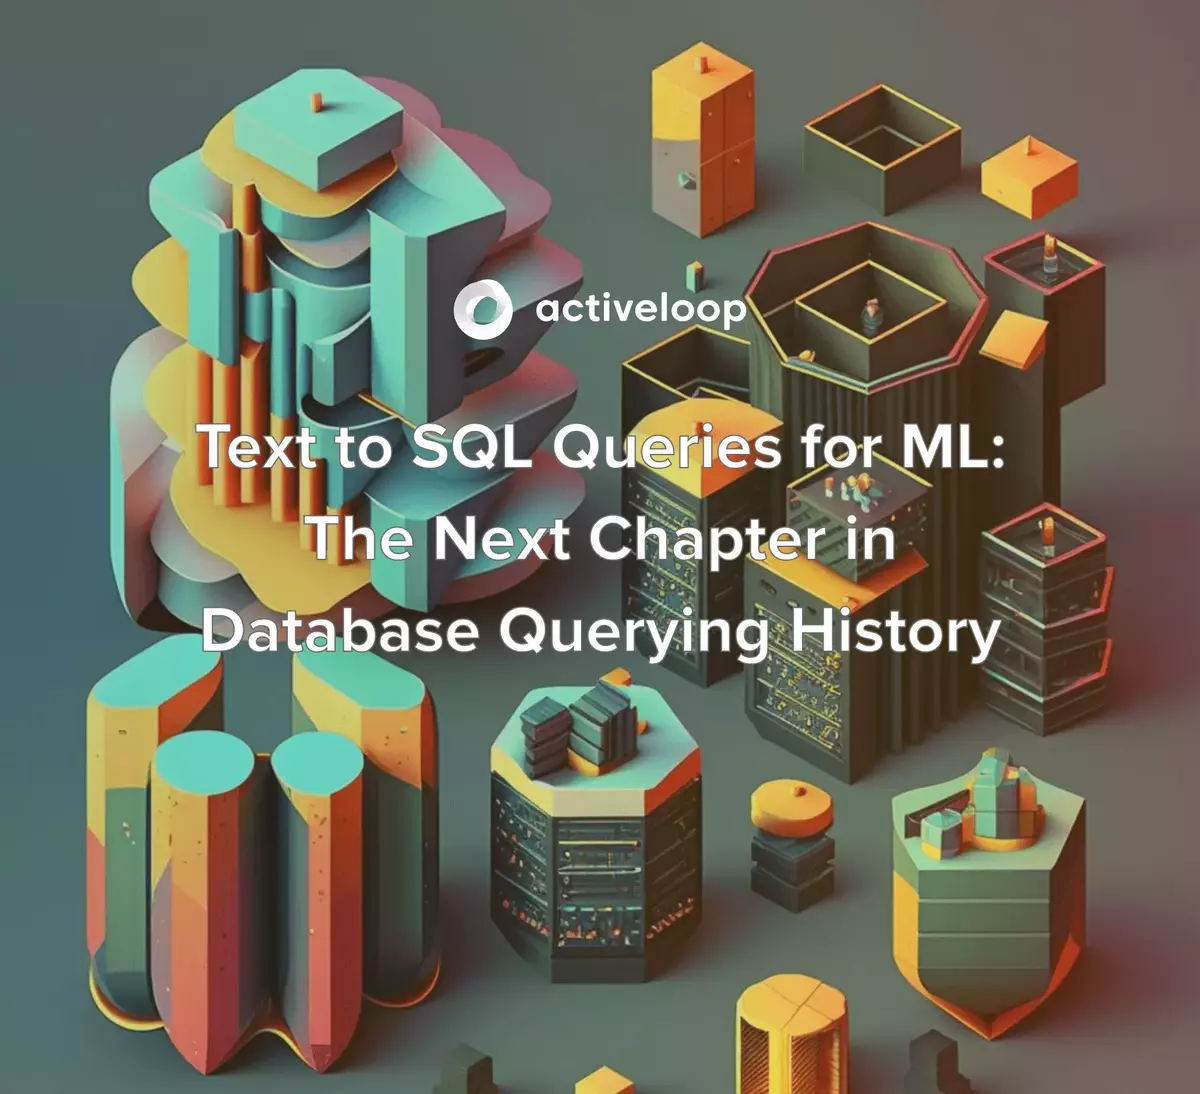 Text to SQL Queries for ML: the Next Chapter in Database Querying History, Powered by GPT-4